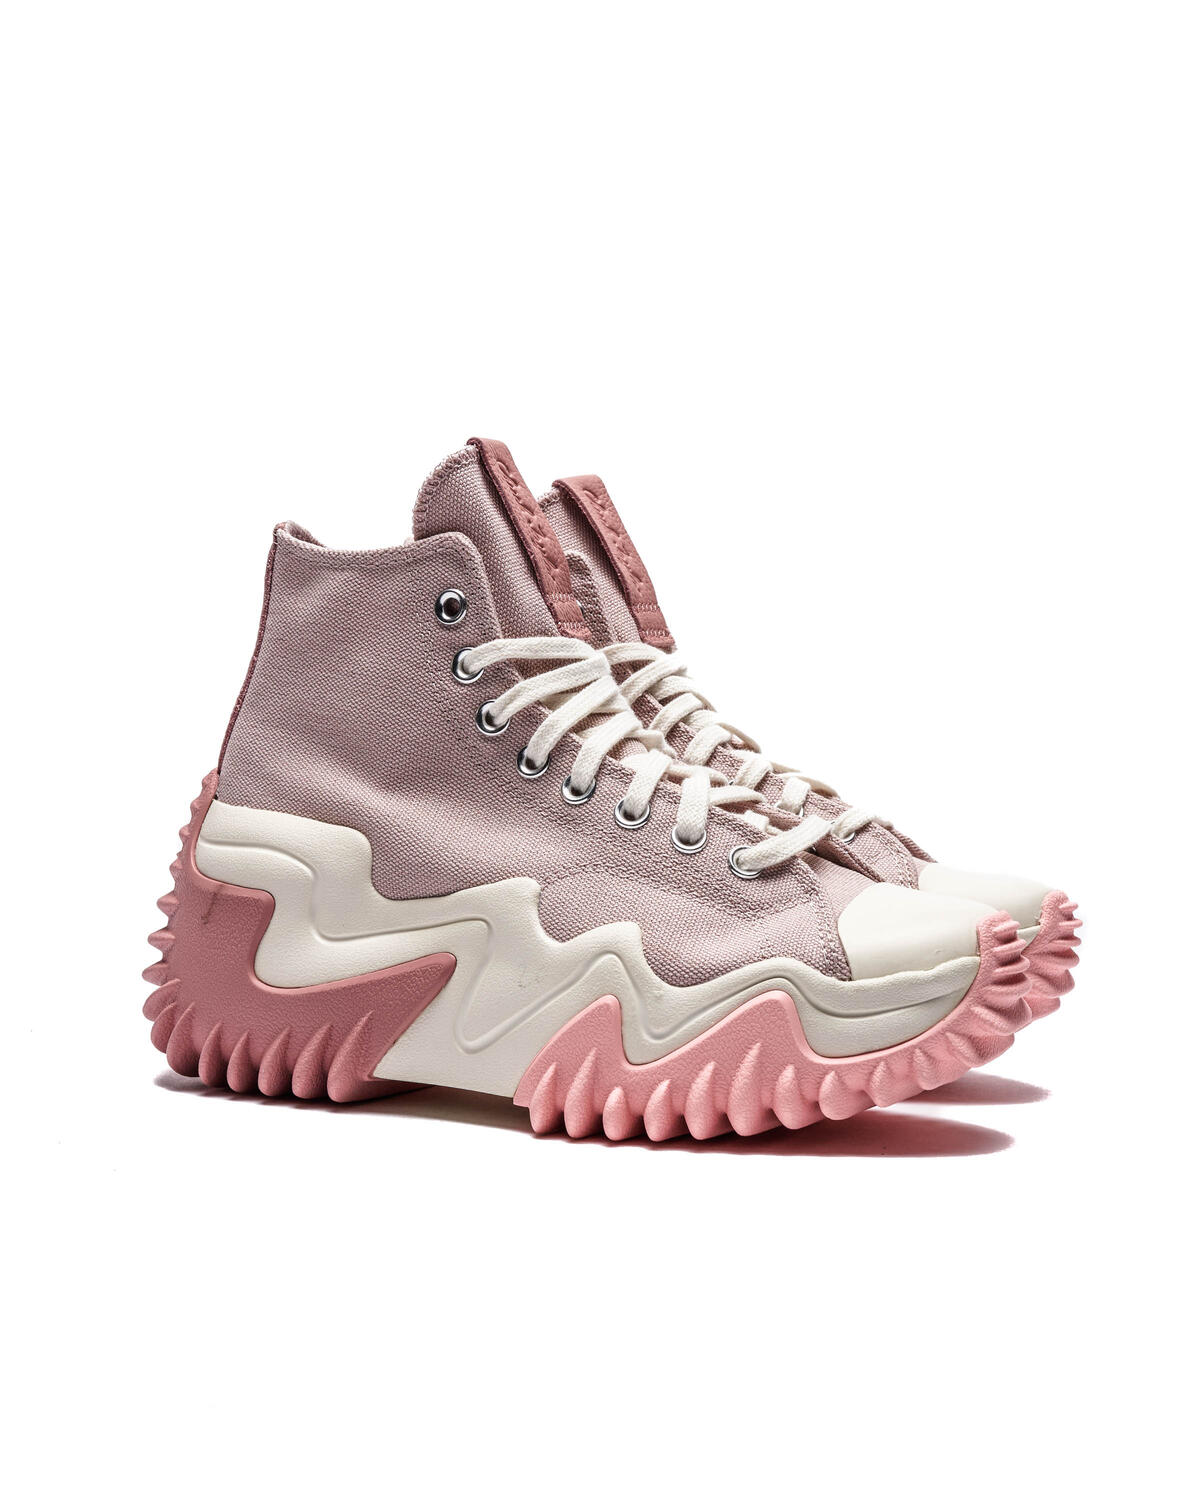 Converse Run Star Motion Hi Trance Form sneakers in baby pink